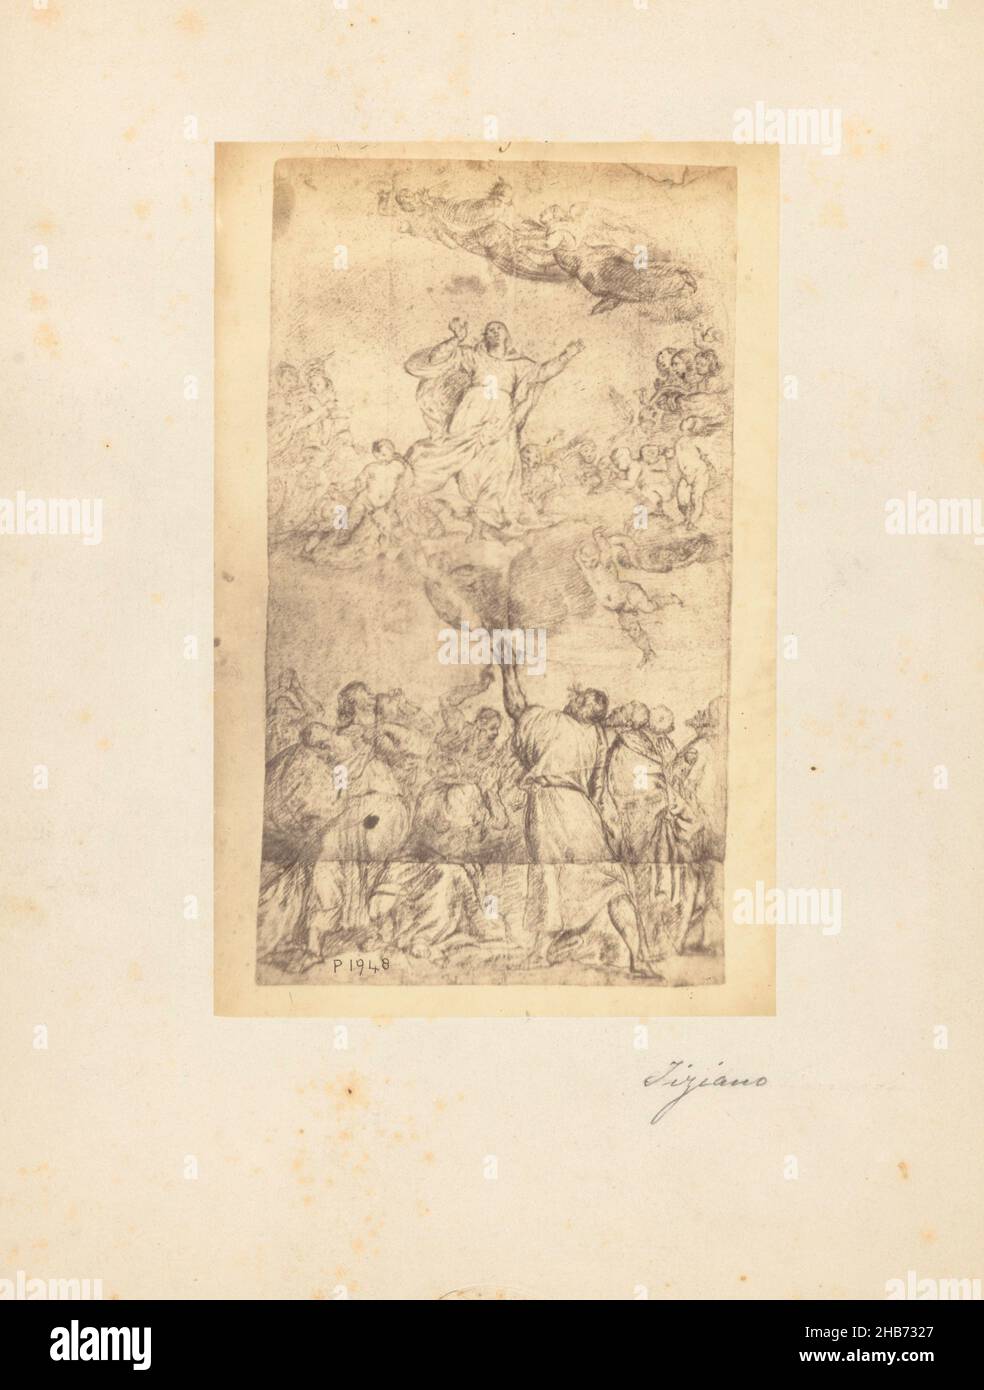 Photoreproduction of a drawing depicting the Ascension by Titian, Giovanni Brampton Philpot (mentioned on object), intermediary draughtsman: Titiaan (mentioned on object), Florence, 1851 - 1878, paper, cardboard, albumen print, height 199 mm × width 127 mmheight 320 mm × width 240 mm Stock Photo